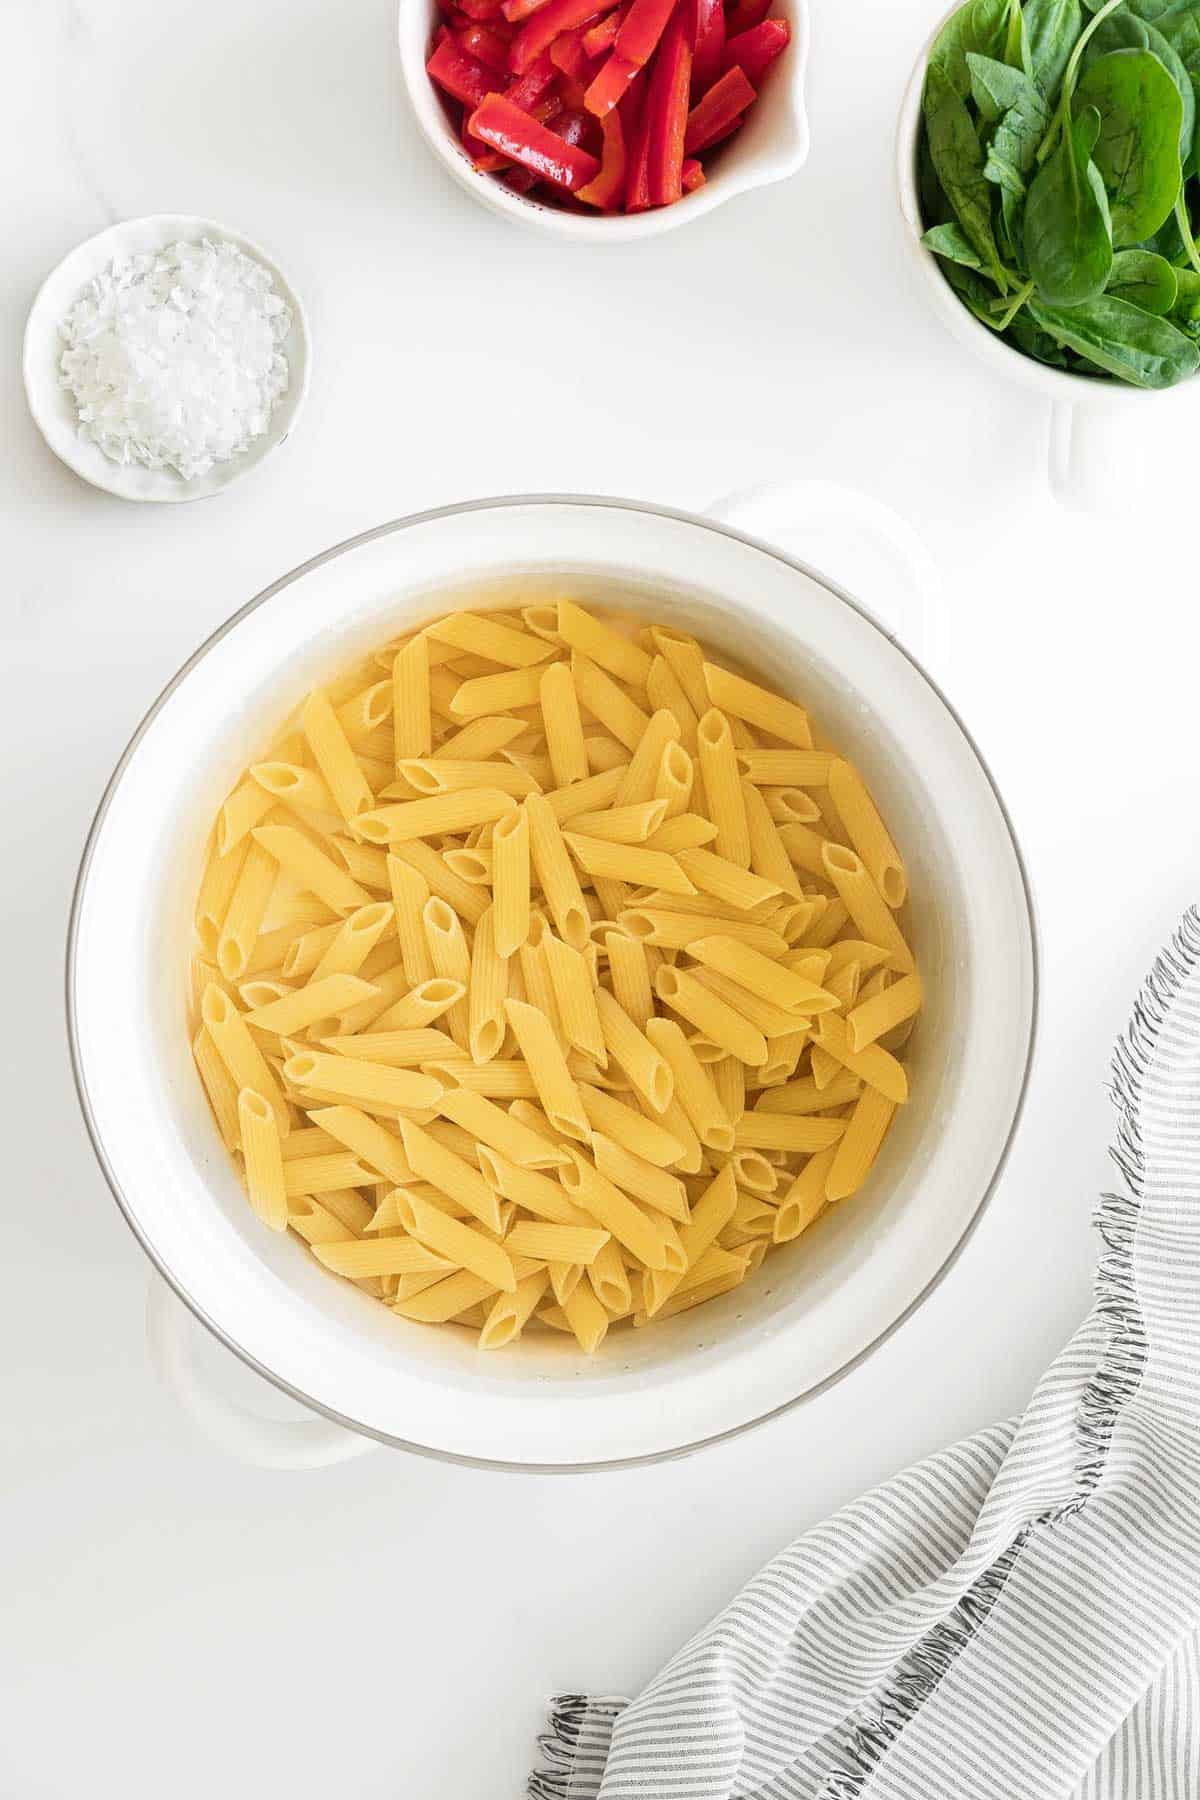 A bowl of raw penne pasta with ingredients like spinach and red pepper on the side, ready for cooking.